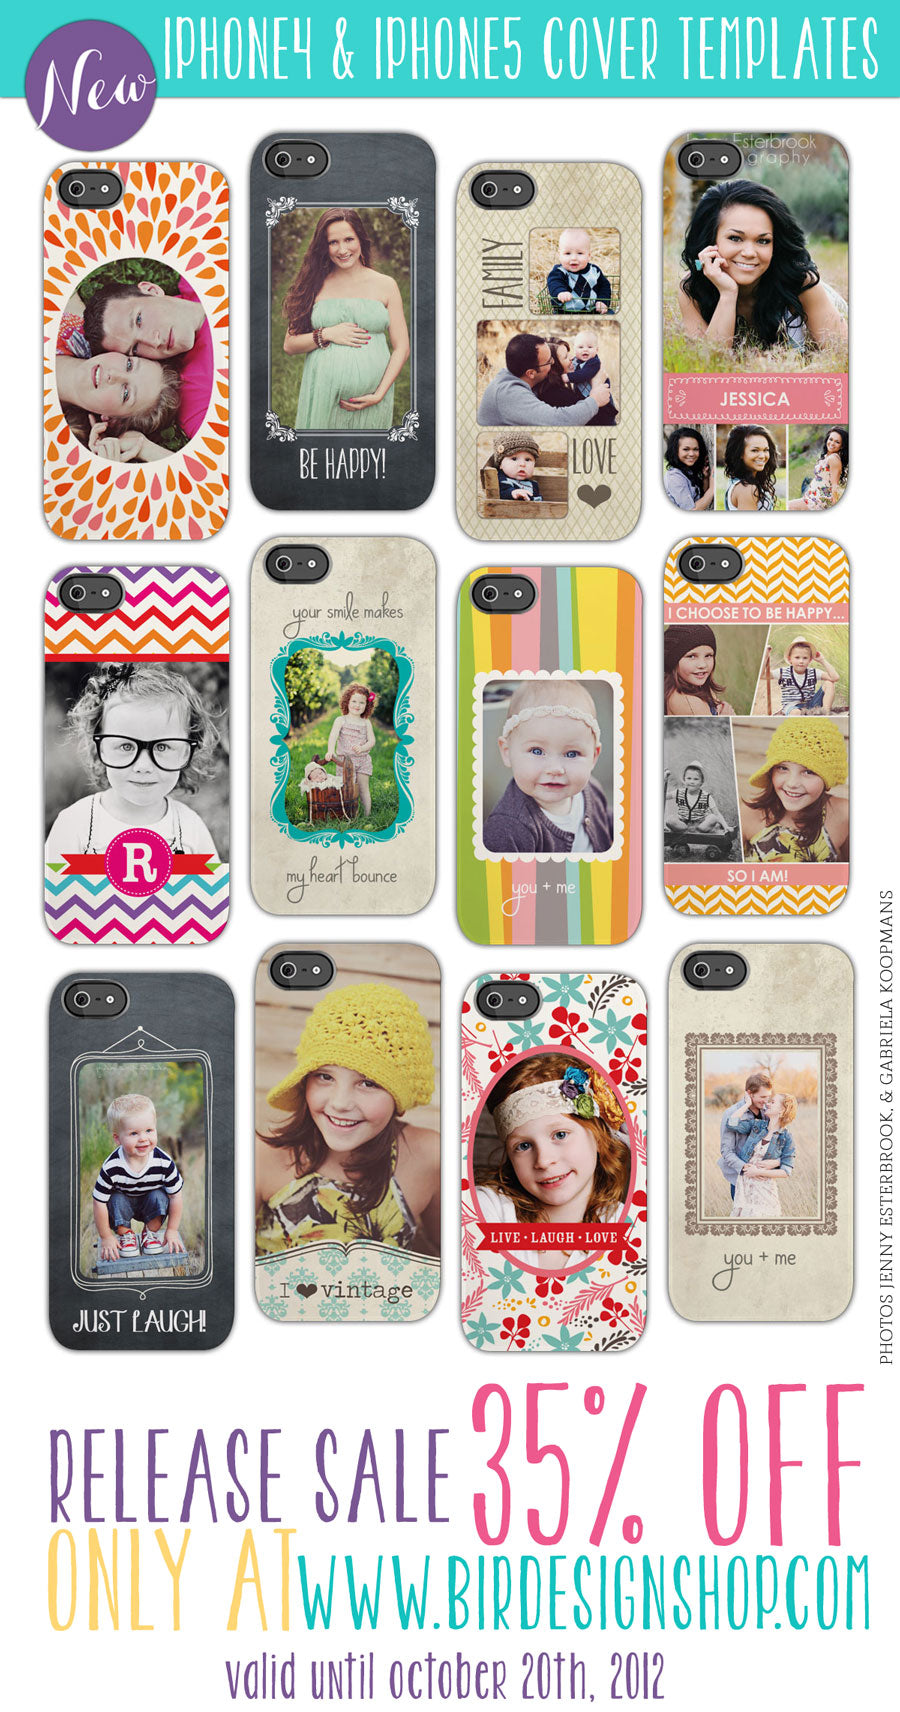 iphone 4 and iphon 5 covers templates photoshop templates for photographers